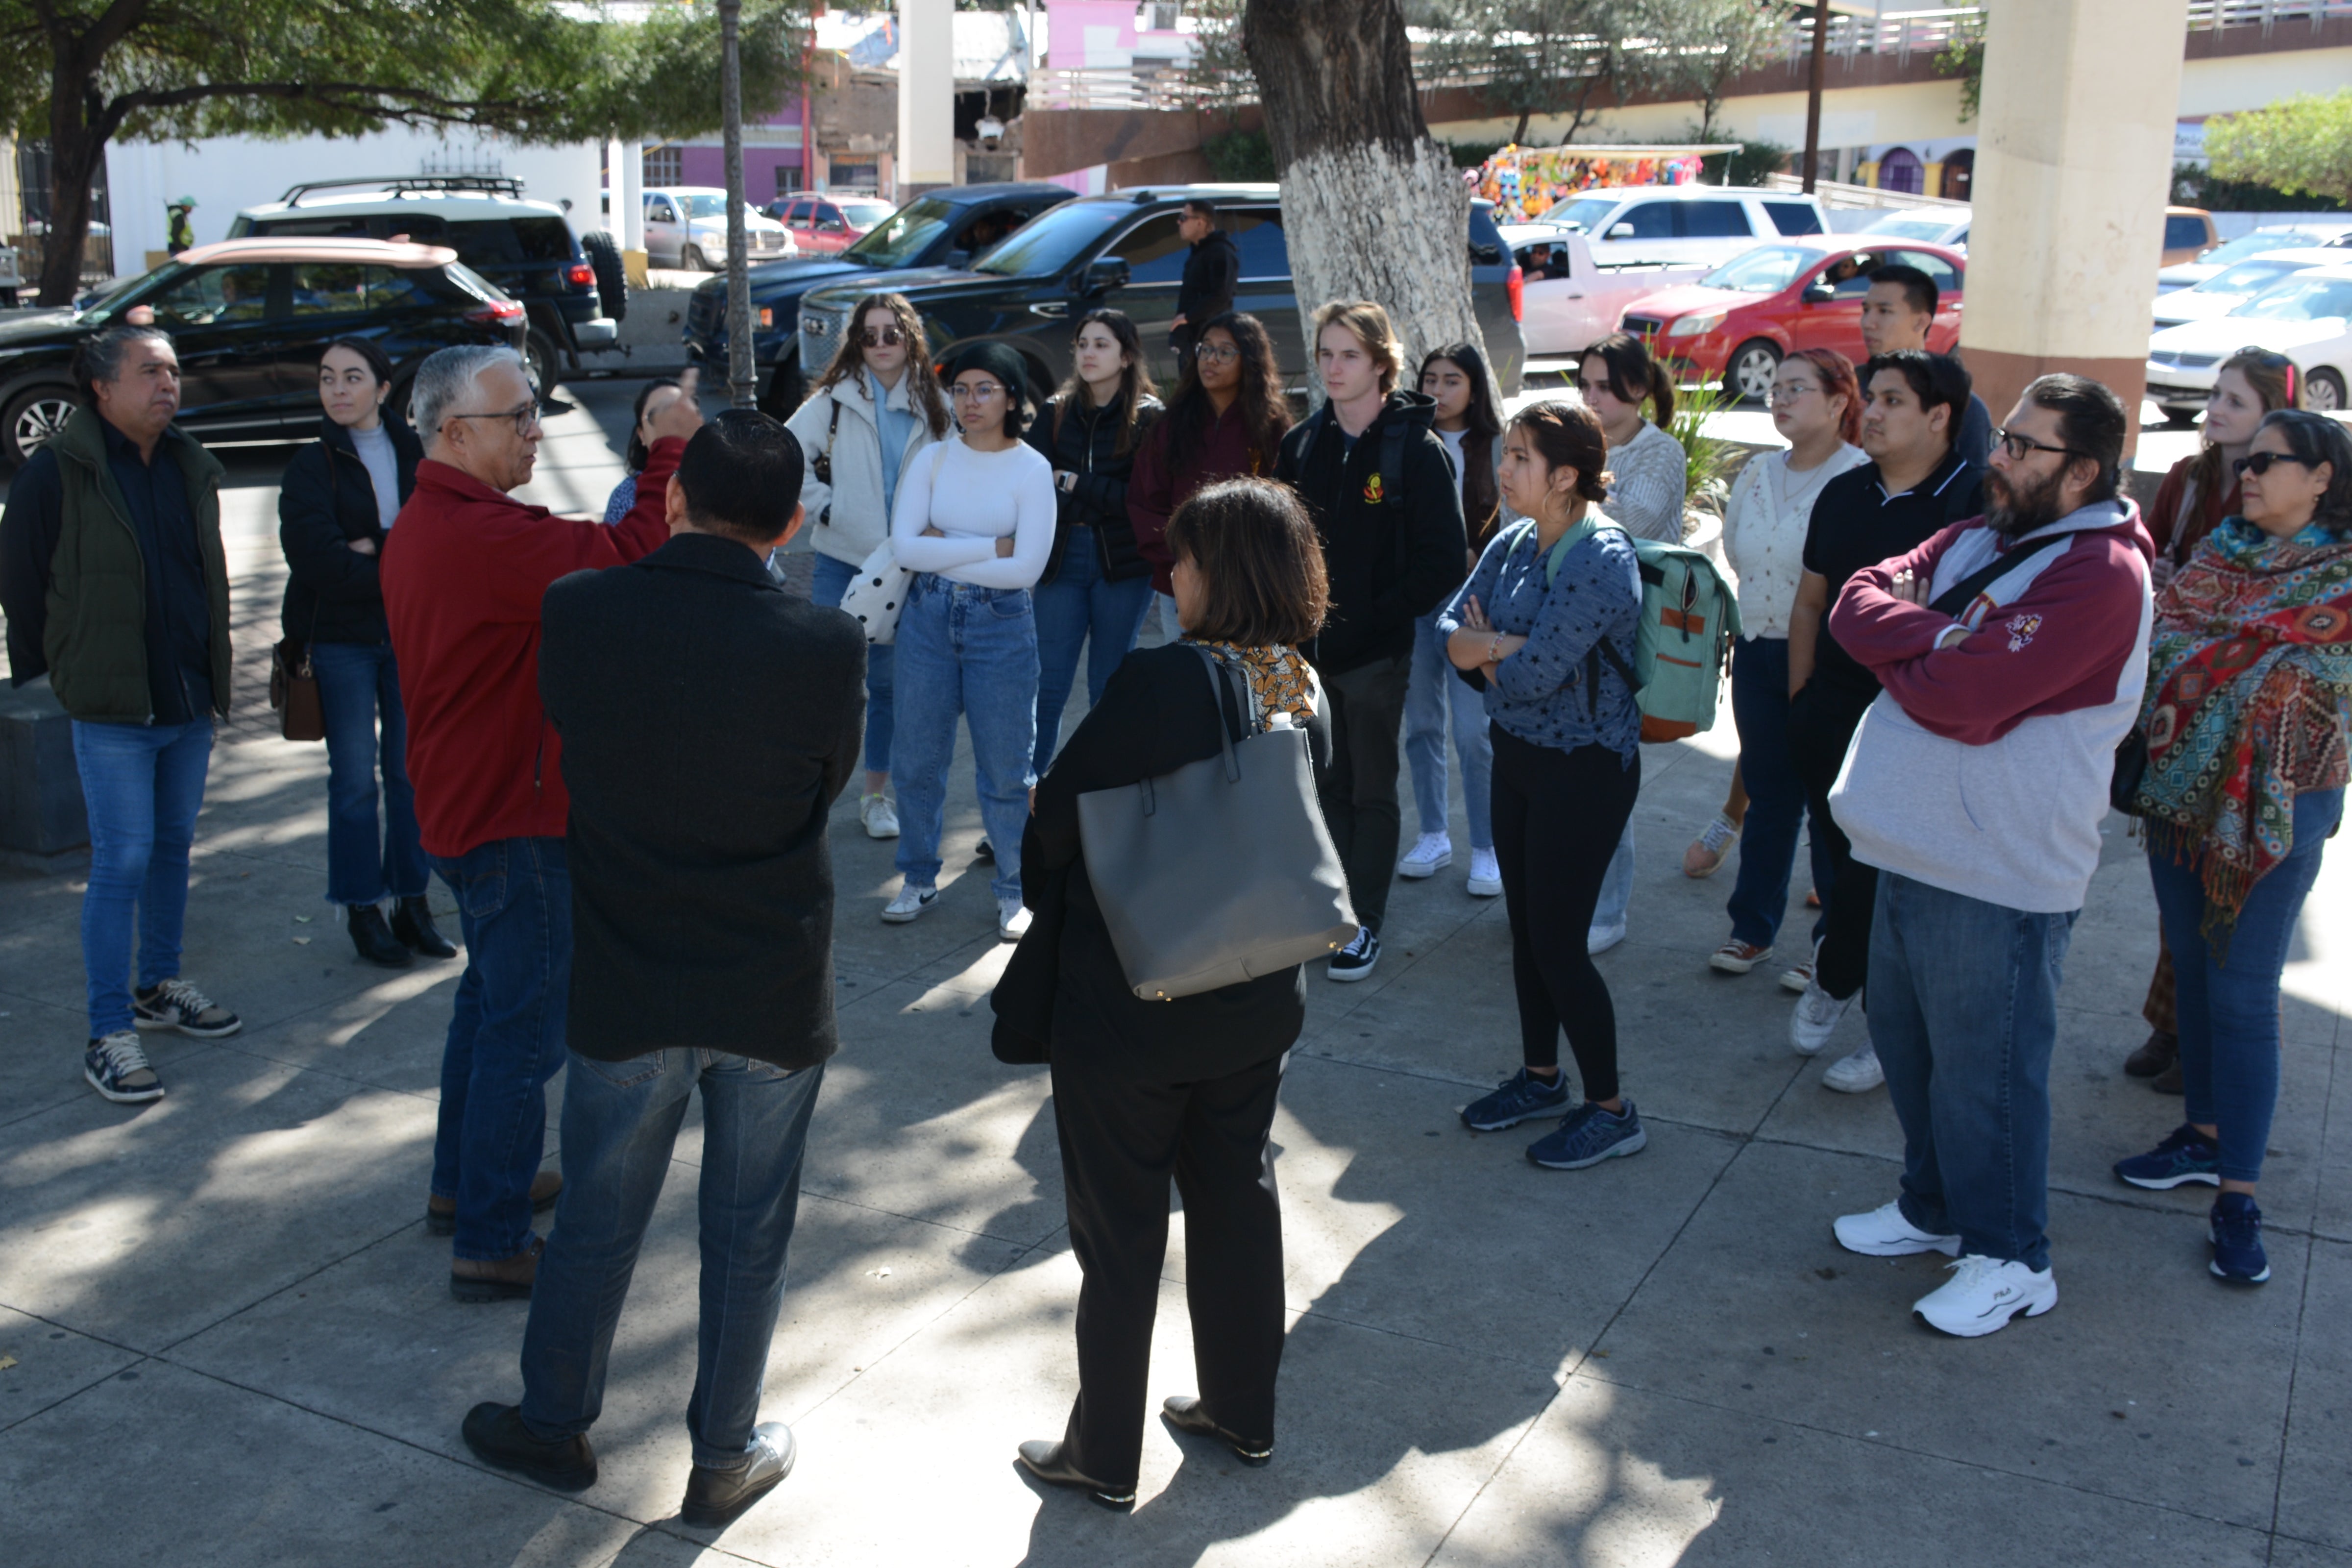 Local business owner,Jaime Gonzalez, gives a walking tour of the Nogales, Sonora, downtown area to ASU students on November 5, 2022.